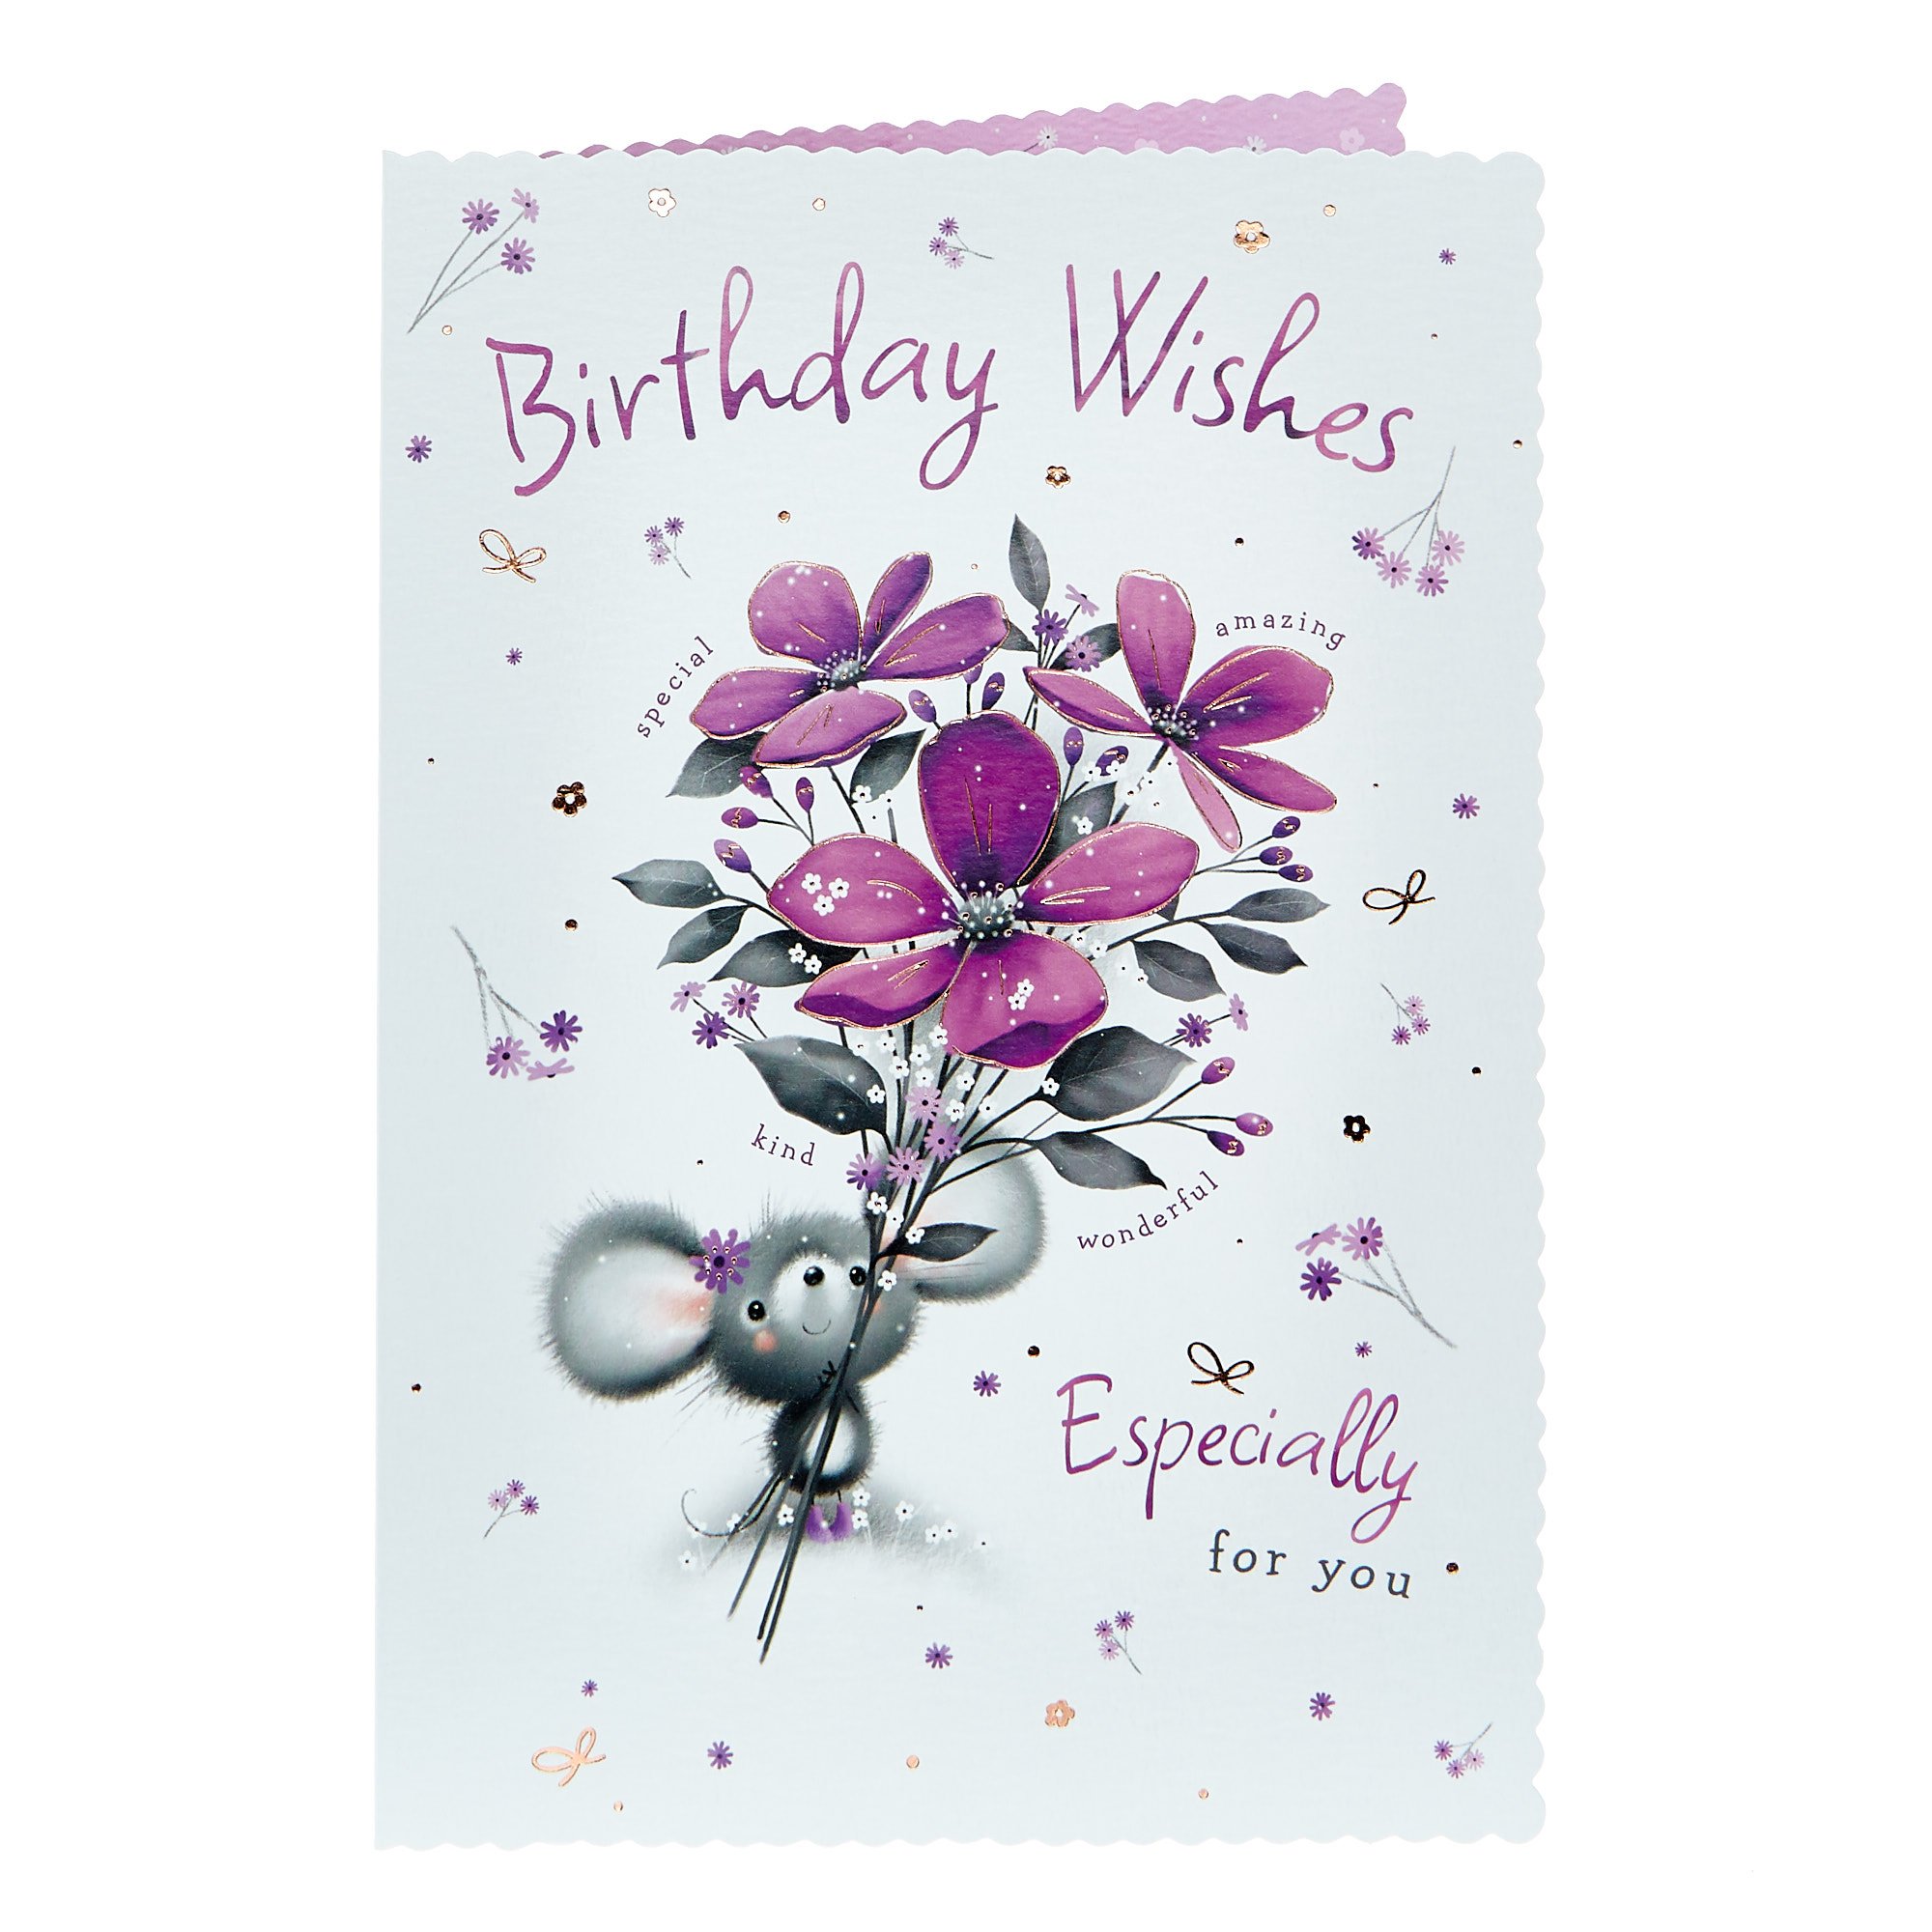 Birthday Card - Wishes Especially For You